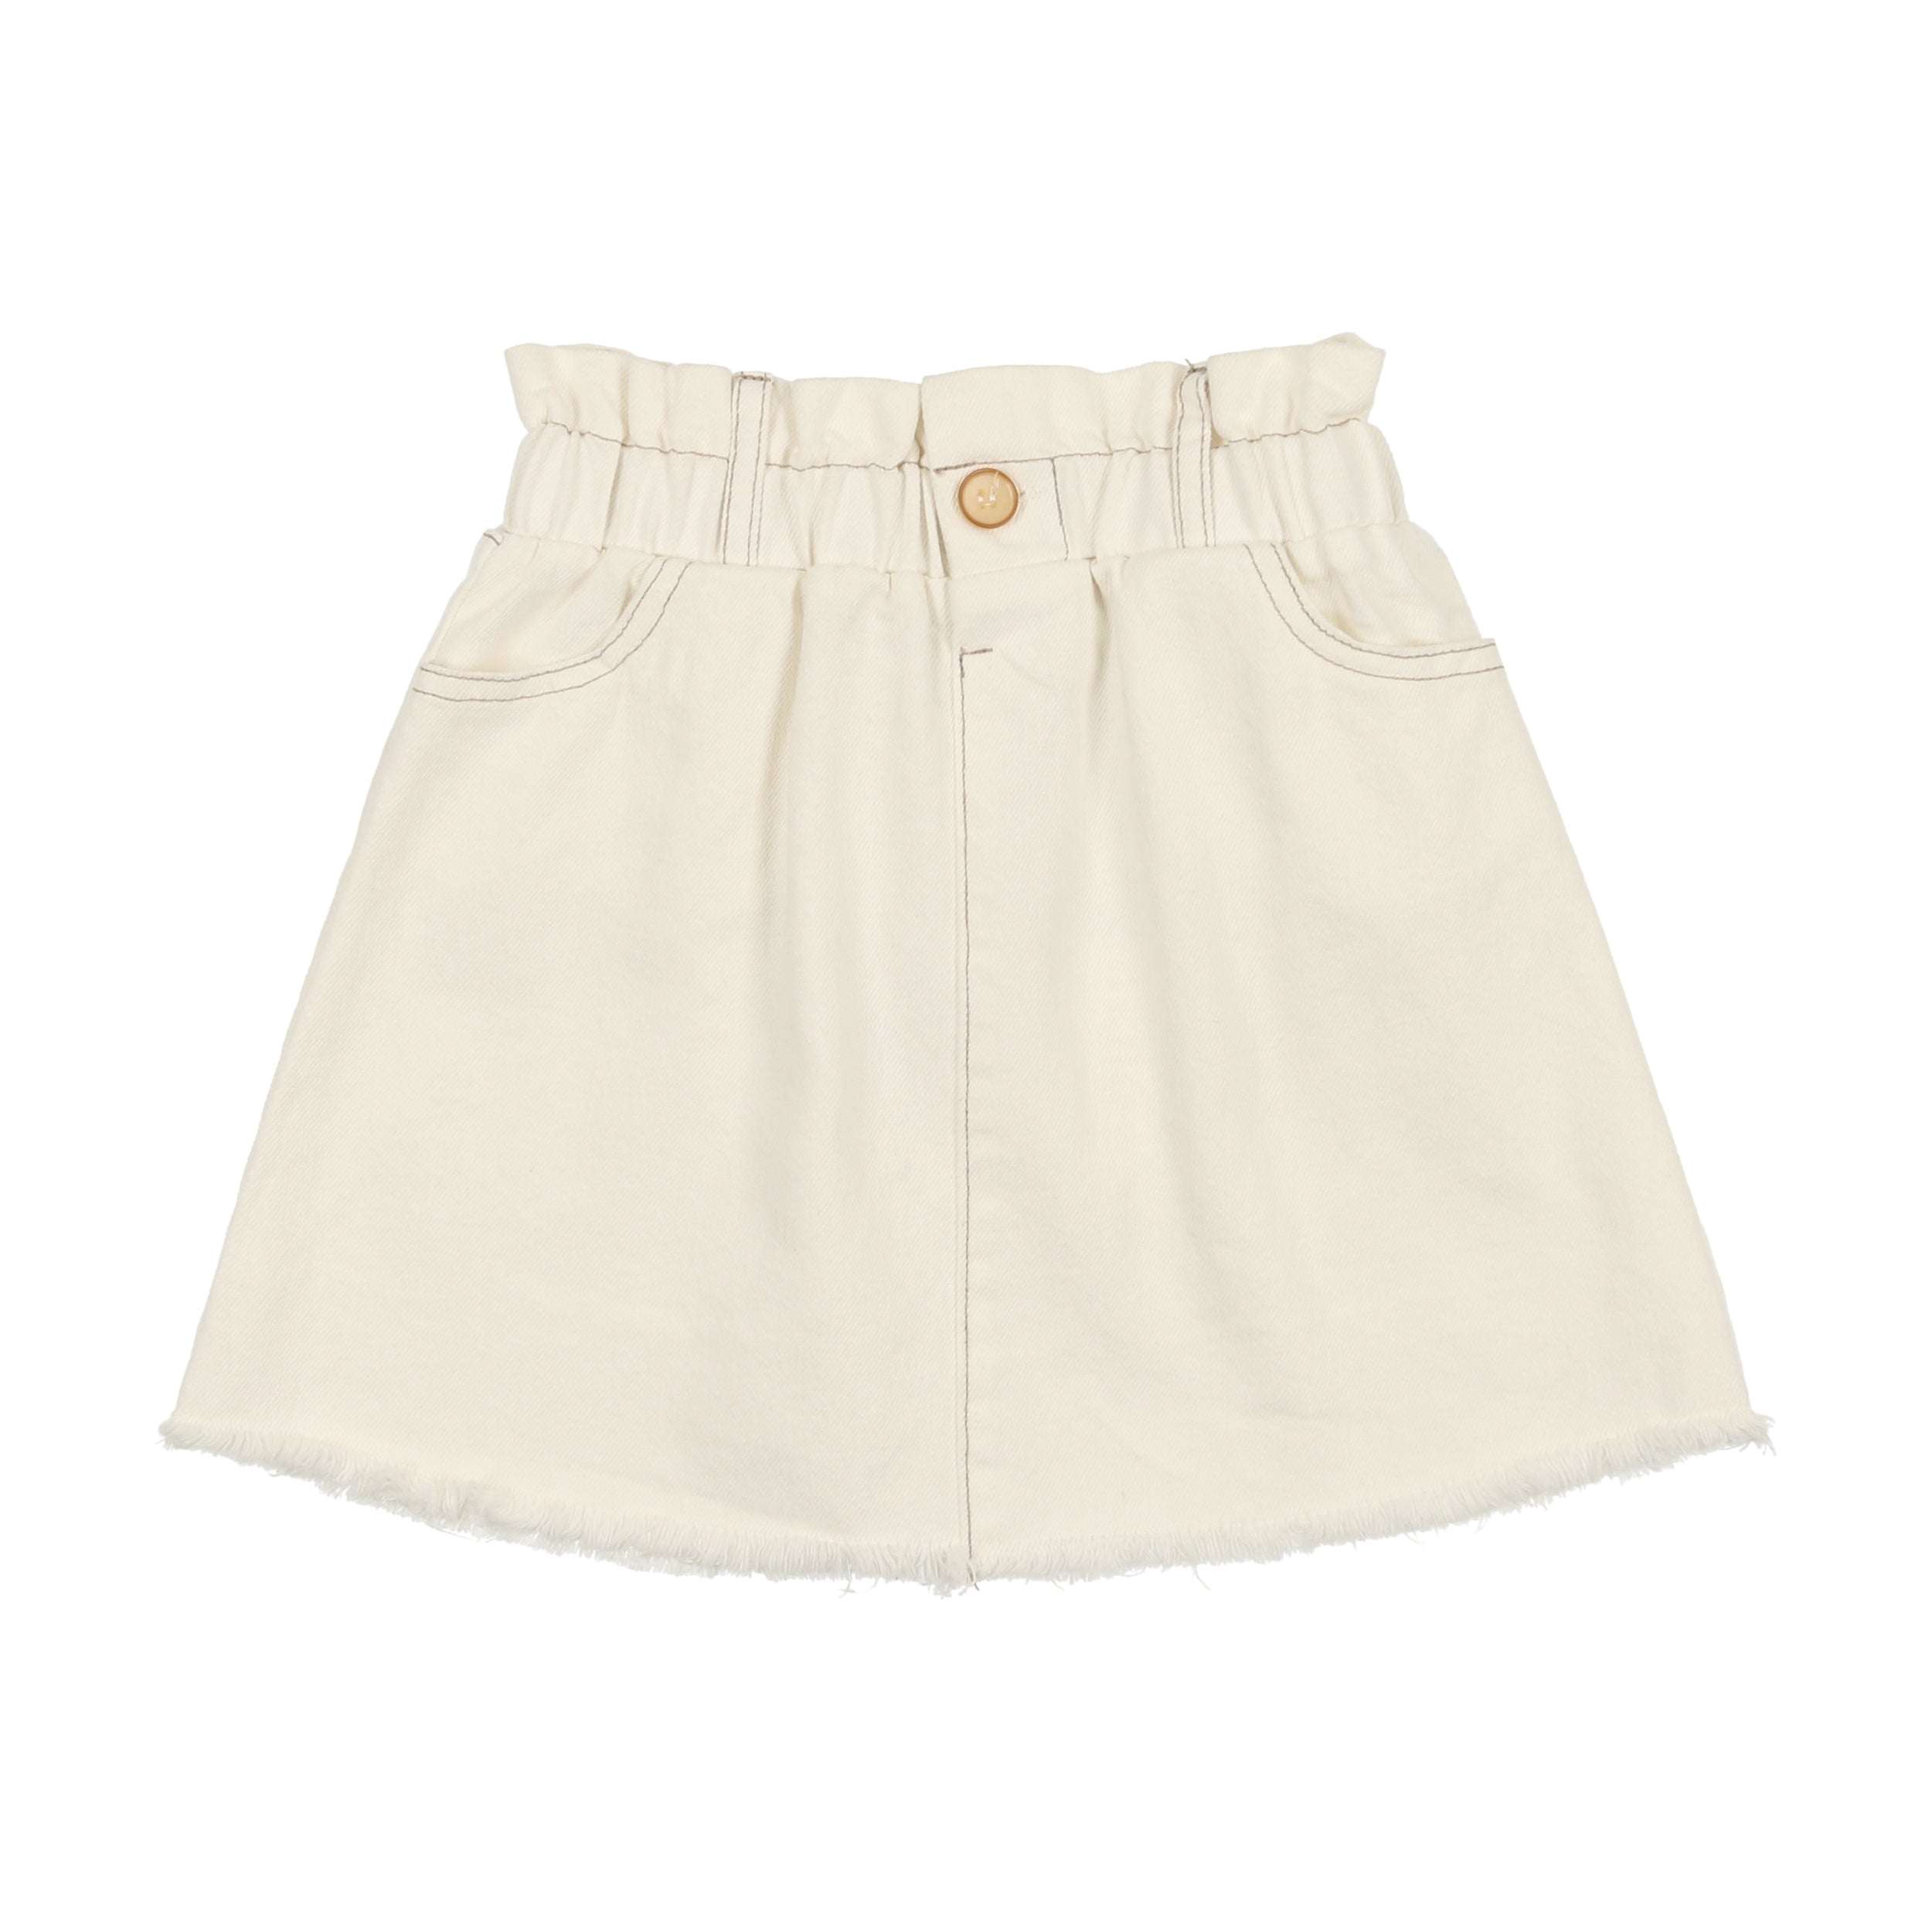 Summer Outfits For Girls: White T Shirt And Denim Skirt Set Perfect For  Baby And Toddler Girls From Chihosen02, $5.78 | DHgate.Com